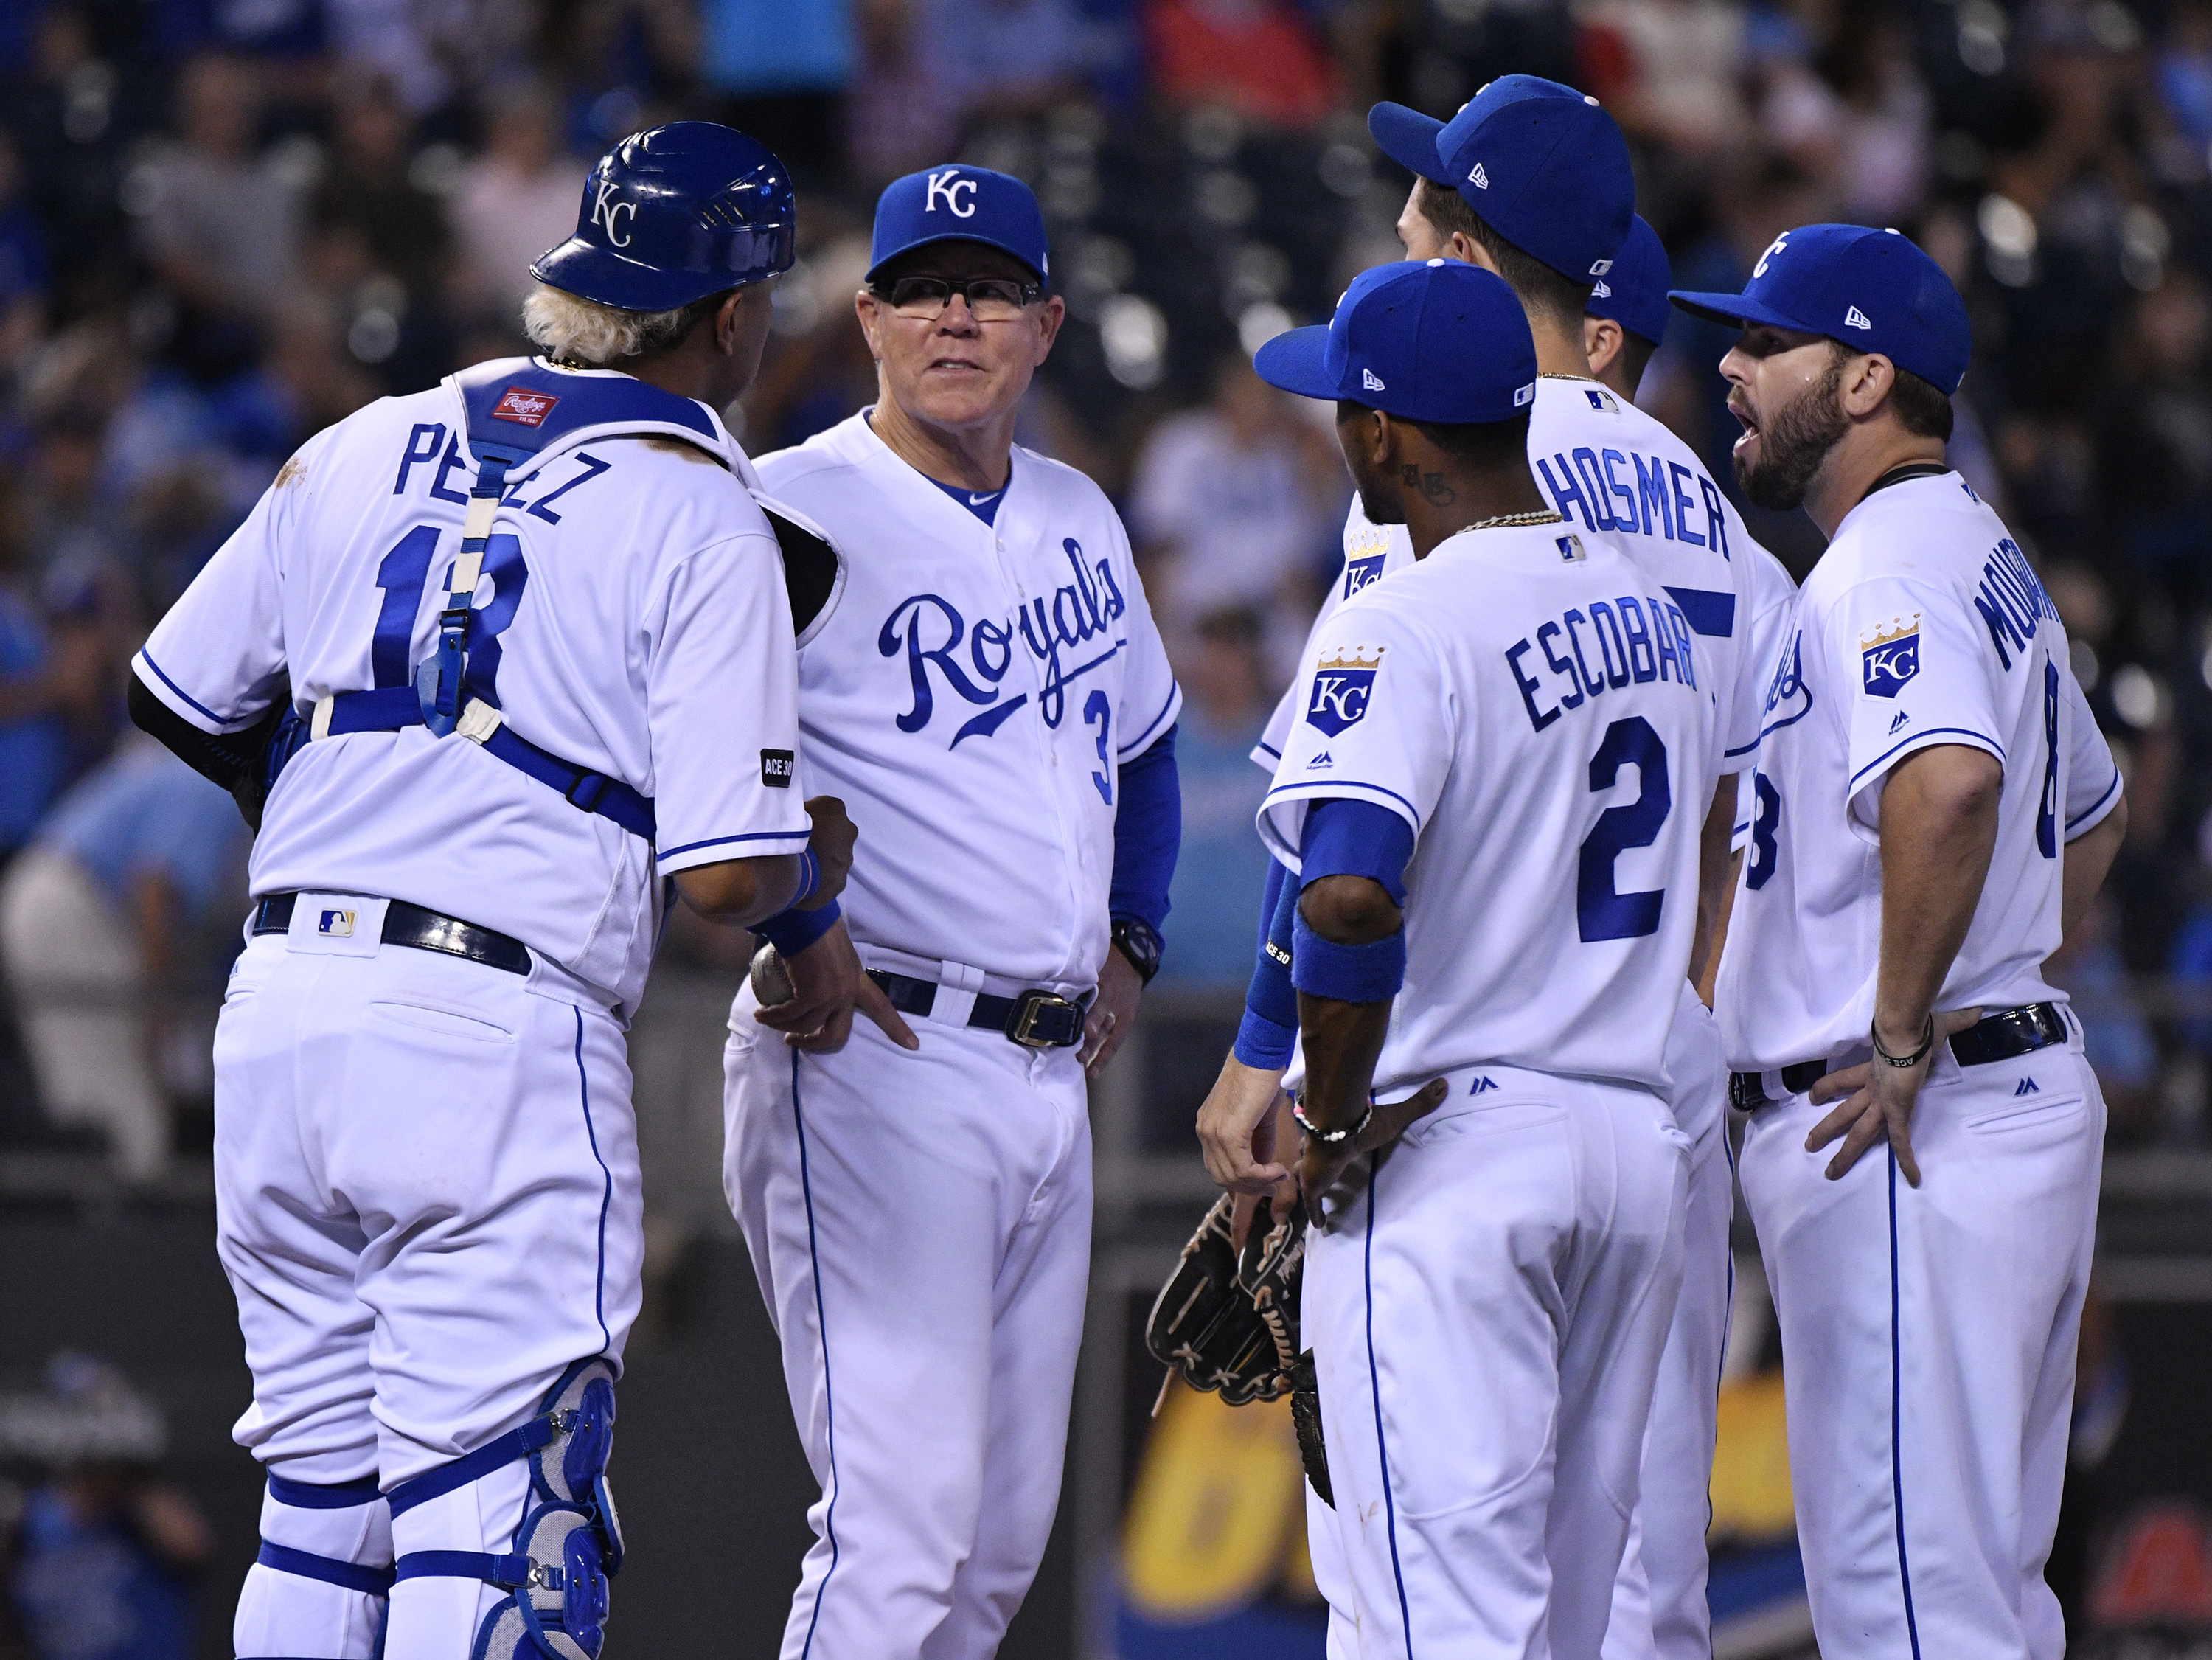 Ranking the Royals New Uniforms